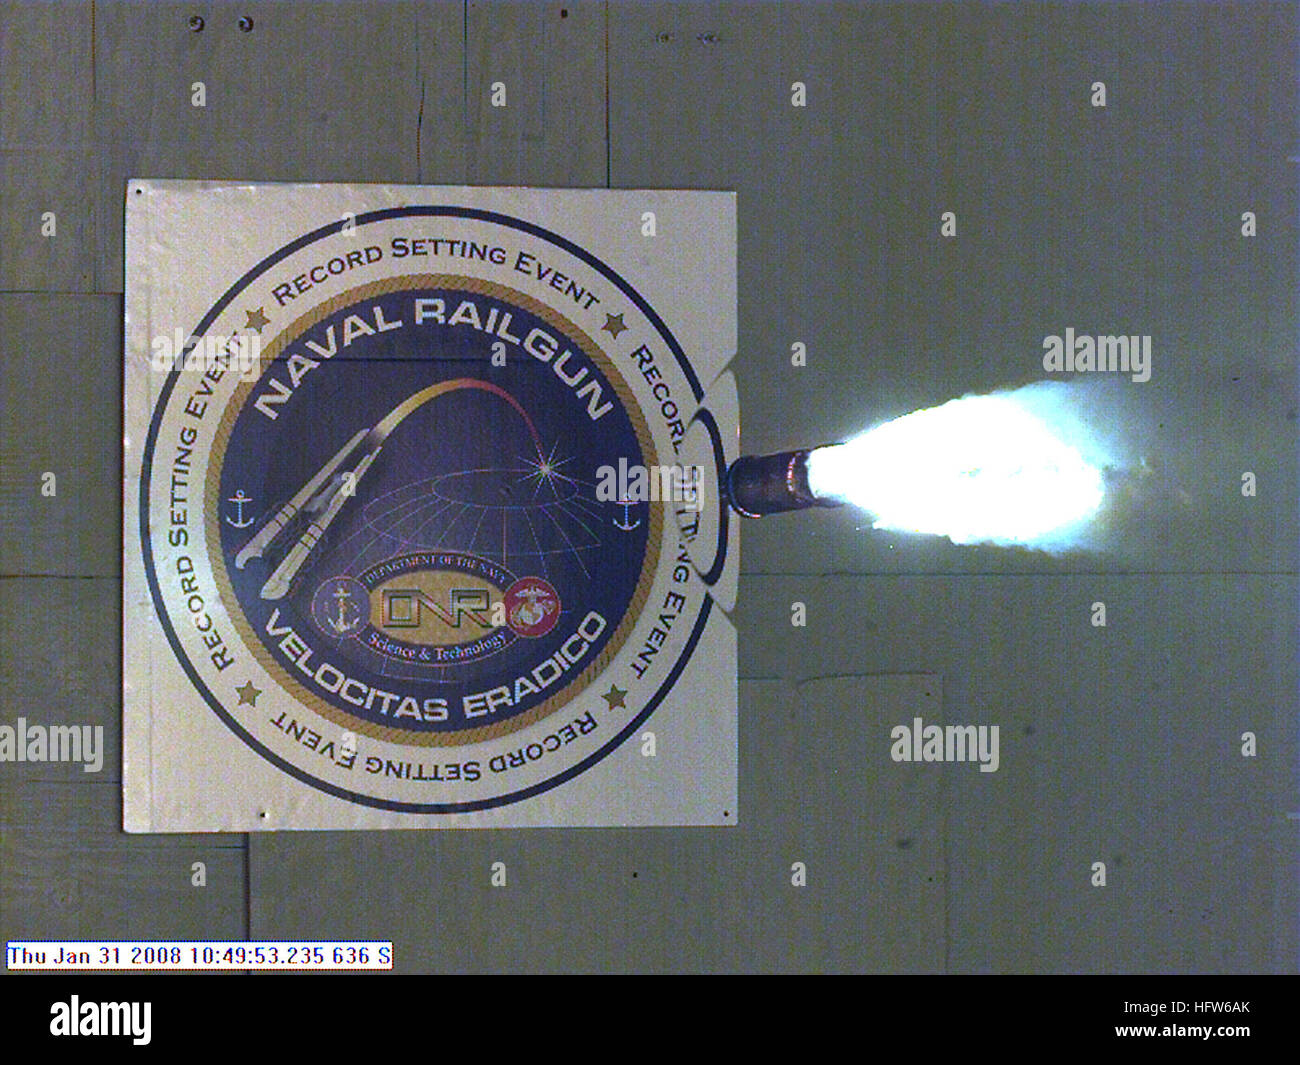 080131-N-0000X-004   DAHLGREN, Va. (Jan. 31, 2008) Photograph taken from a high-speed video camera during a record-setting firing of an electromagnetic railgun (EMRG) at Naval Surface Warfare Center, Dahlgren, Va., on January 31, 2008, firing at 10.64MJ (megajoules) with a muzzle velocity of 2520 meters per second. The Office of Naval Research’s EMRG program is part of the Department of the Navy’s Science and Technology investments, focused on developing new technologies to support Navy and Marine Corps war fighting needs. This photograph is a frame taken from a high-speed video camera. U.S. N Stock Photo